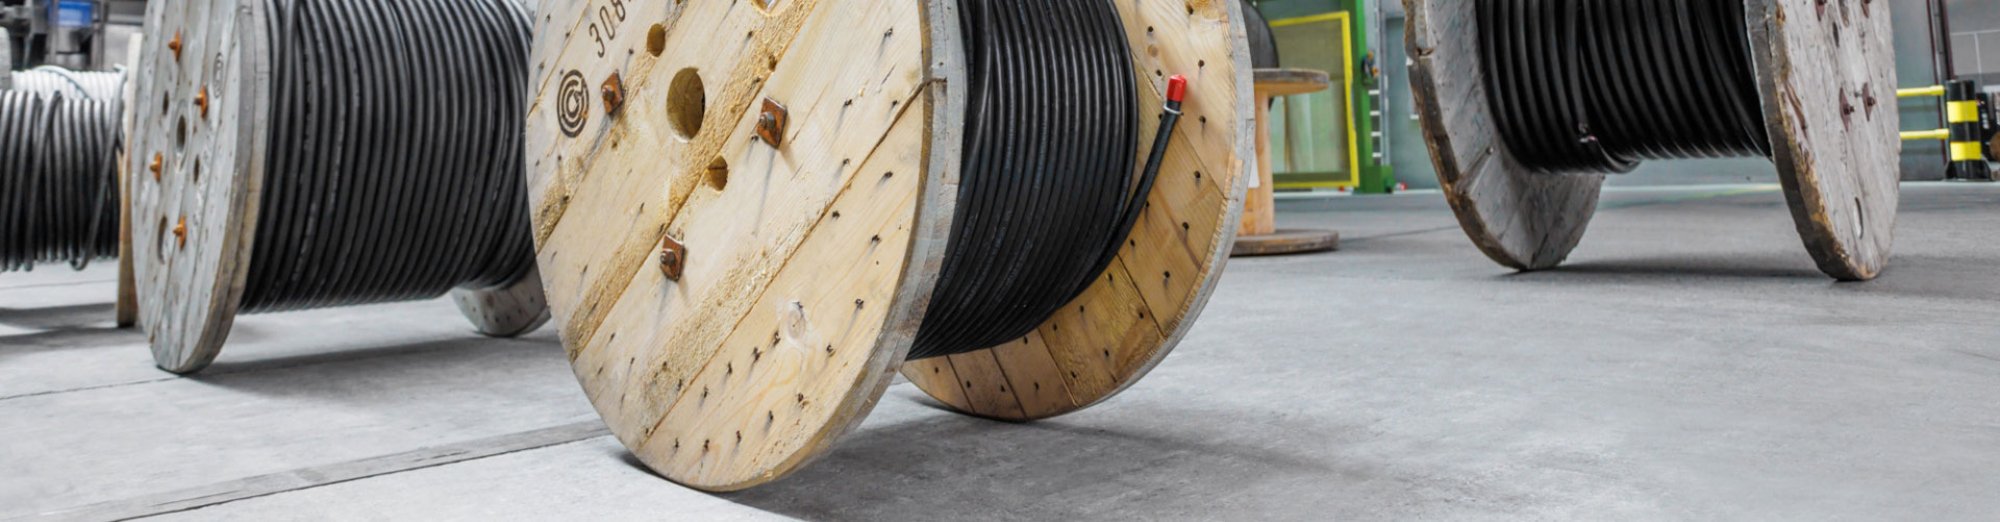  cable drums